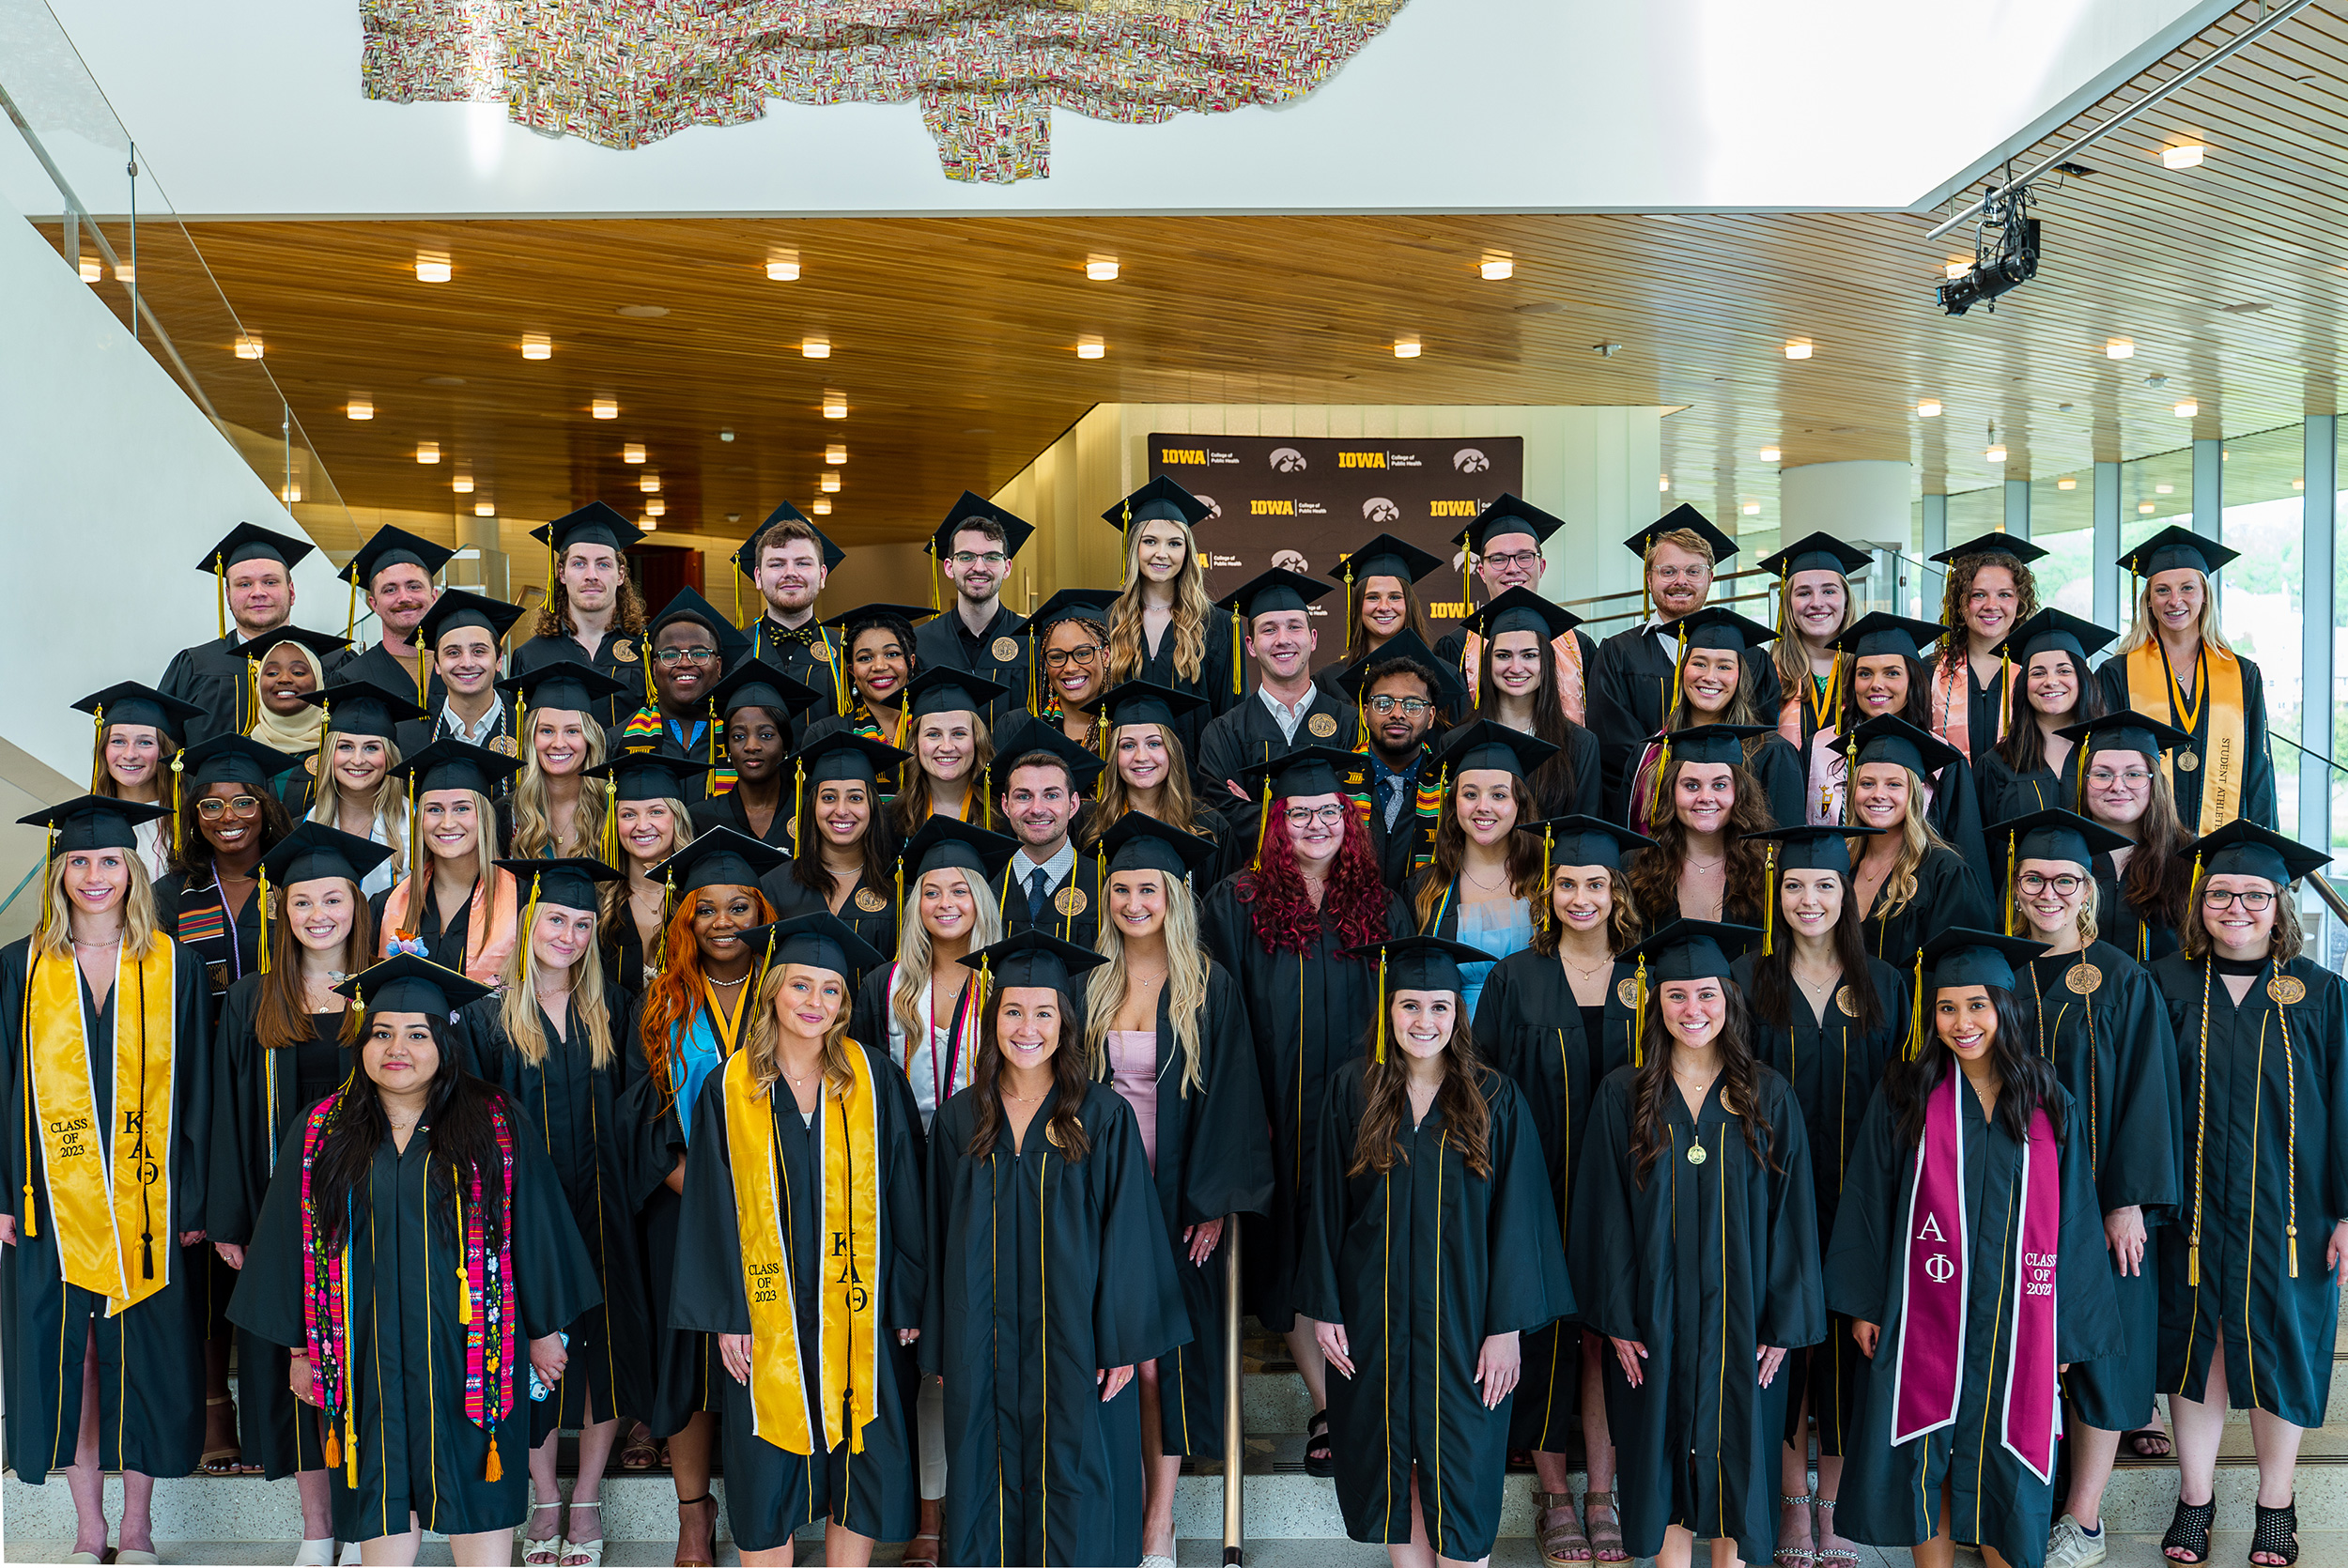 The College of Public Health Undergraduate Class of 2023 poses on the stairwell at Hancher Auditorium.